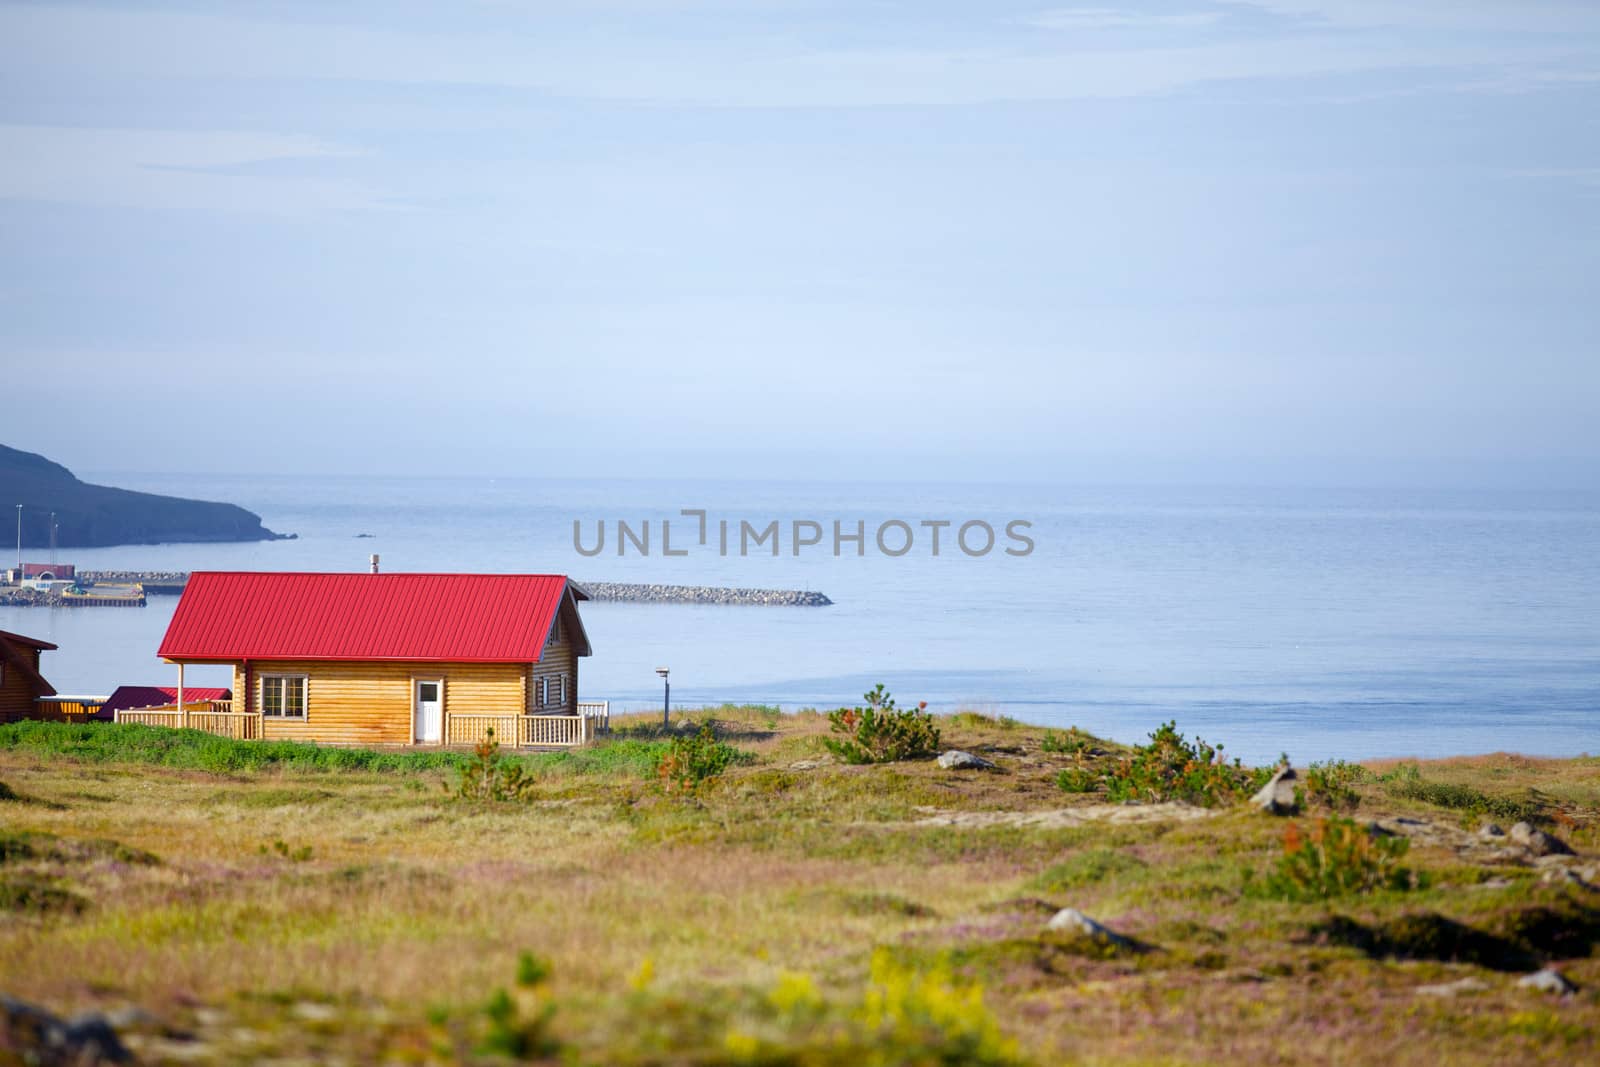 House in Iceland. by maxoliki